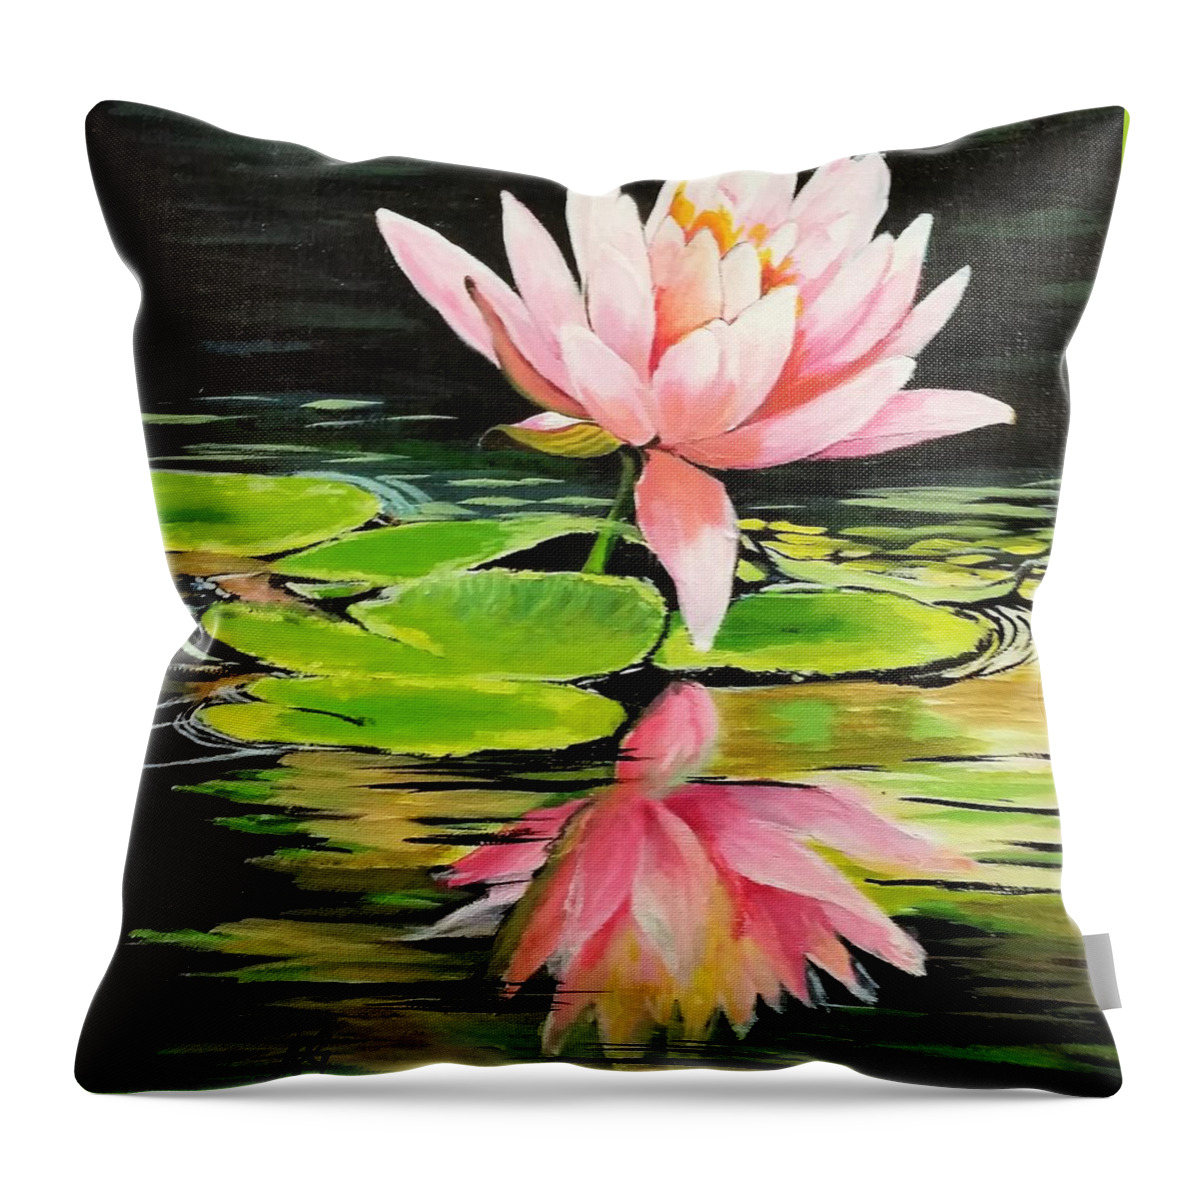 Waterlily Throw Pillow featuring the painting Waterlily by Anne Gardner